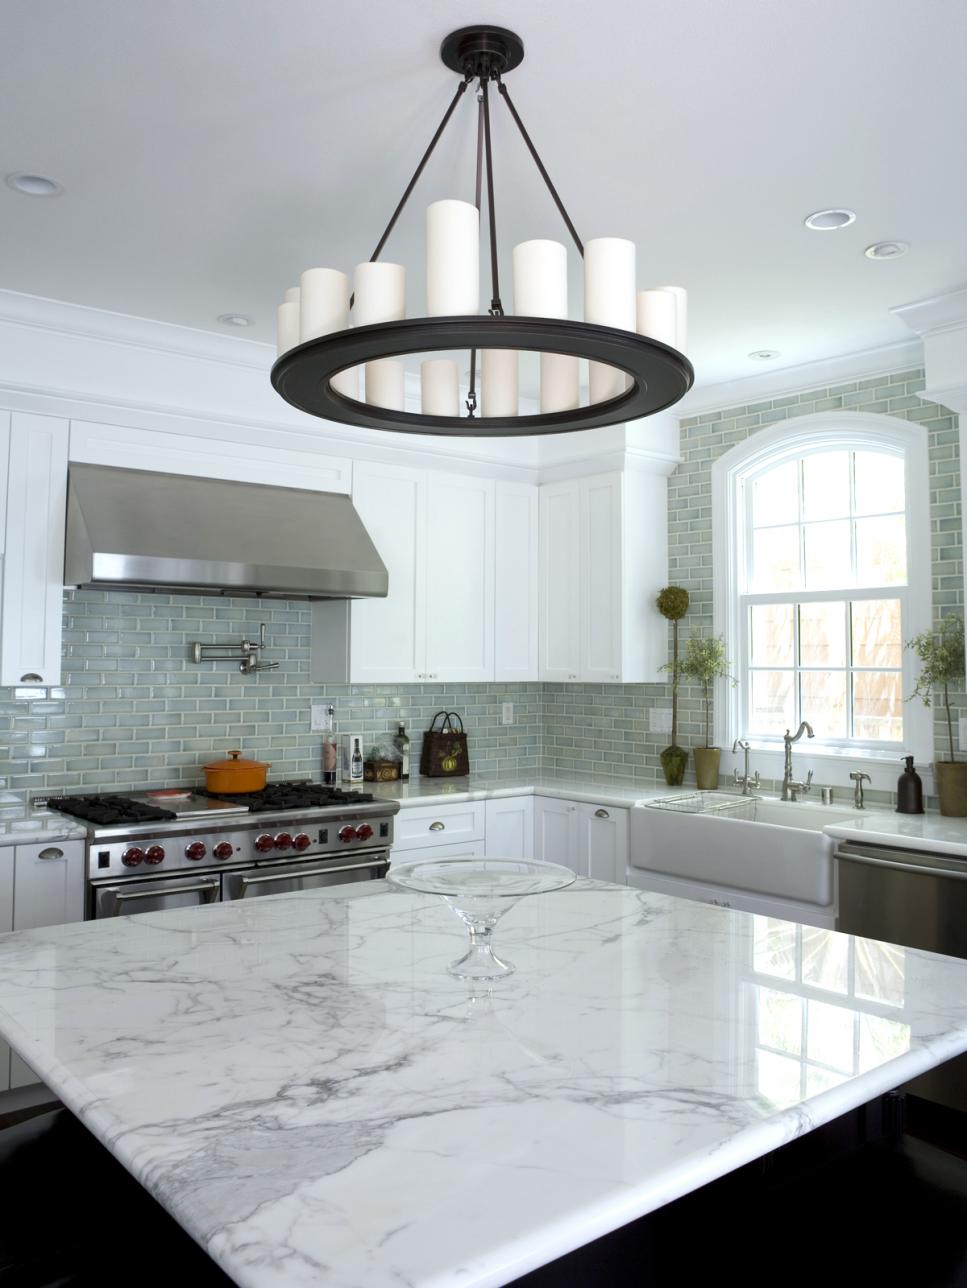 Transitional Kitchen With Square Marble-Topped Island